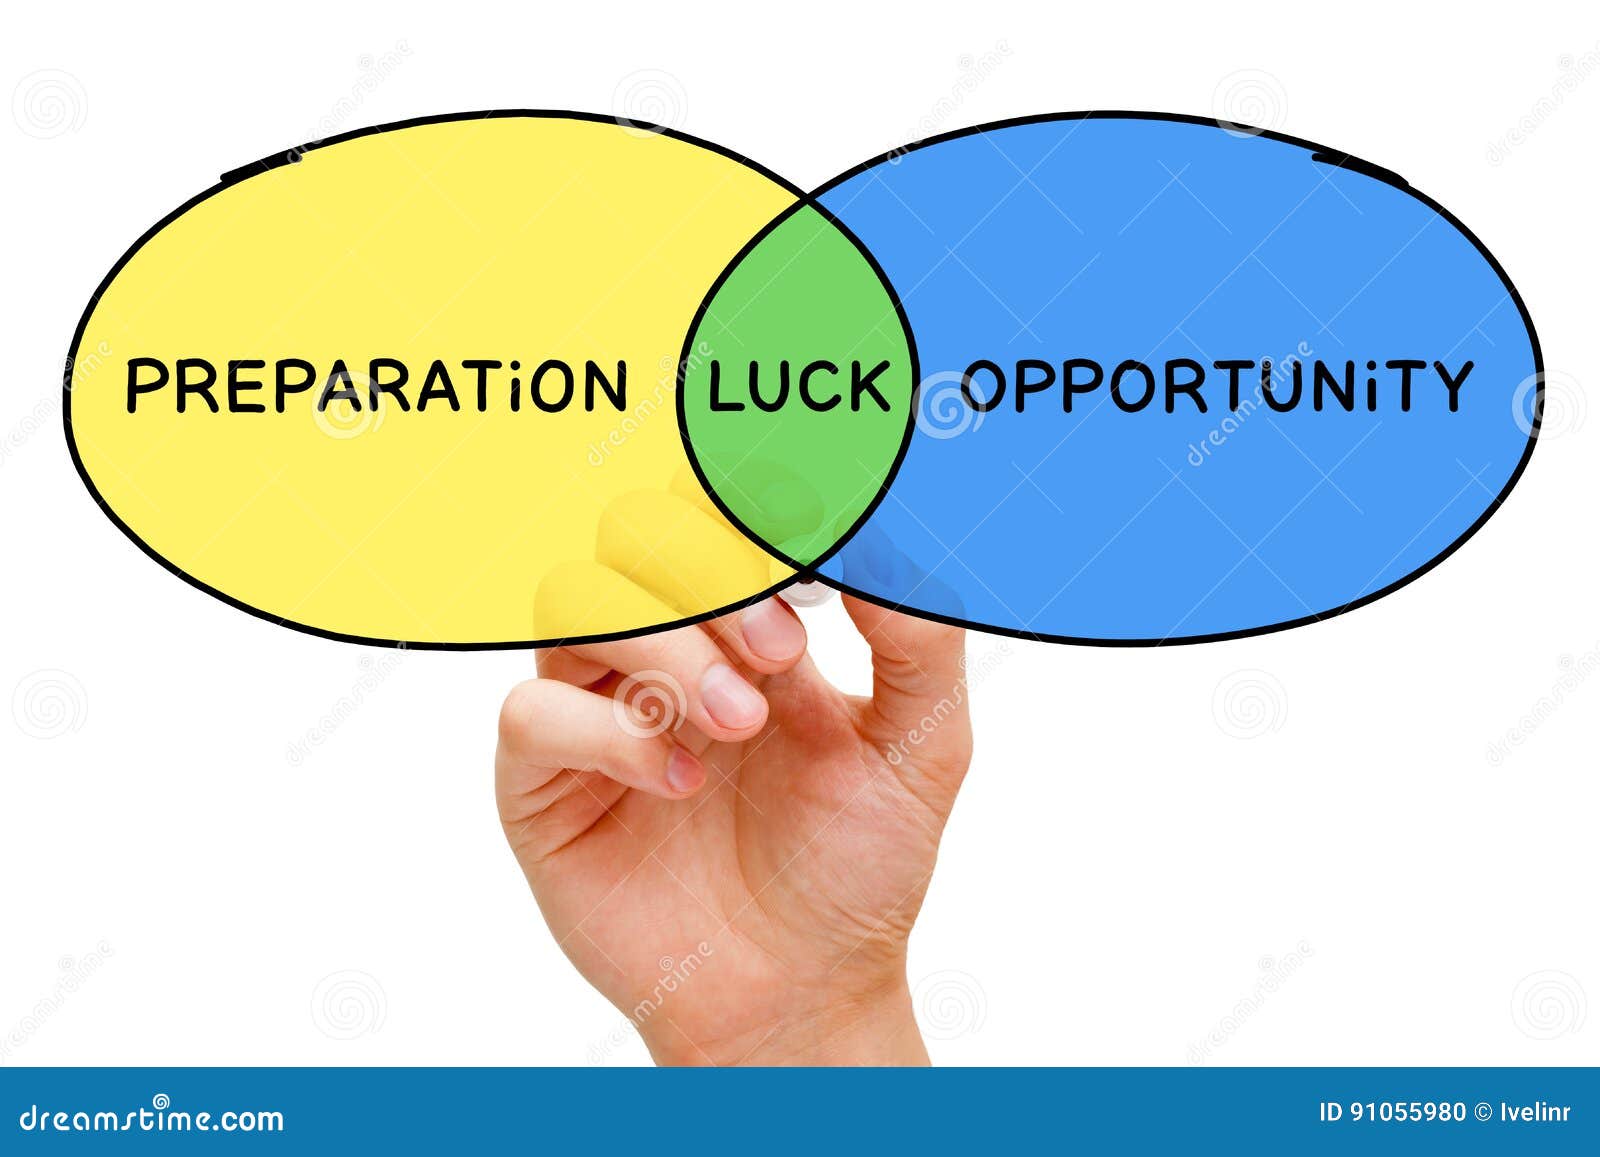 preparation luck opportunity concept